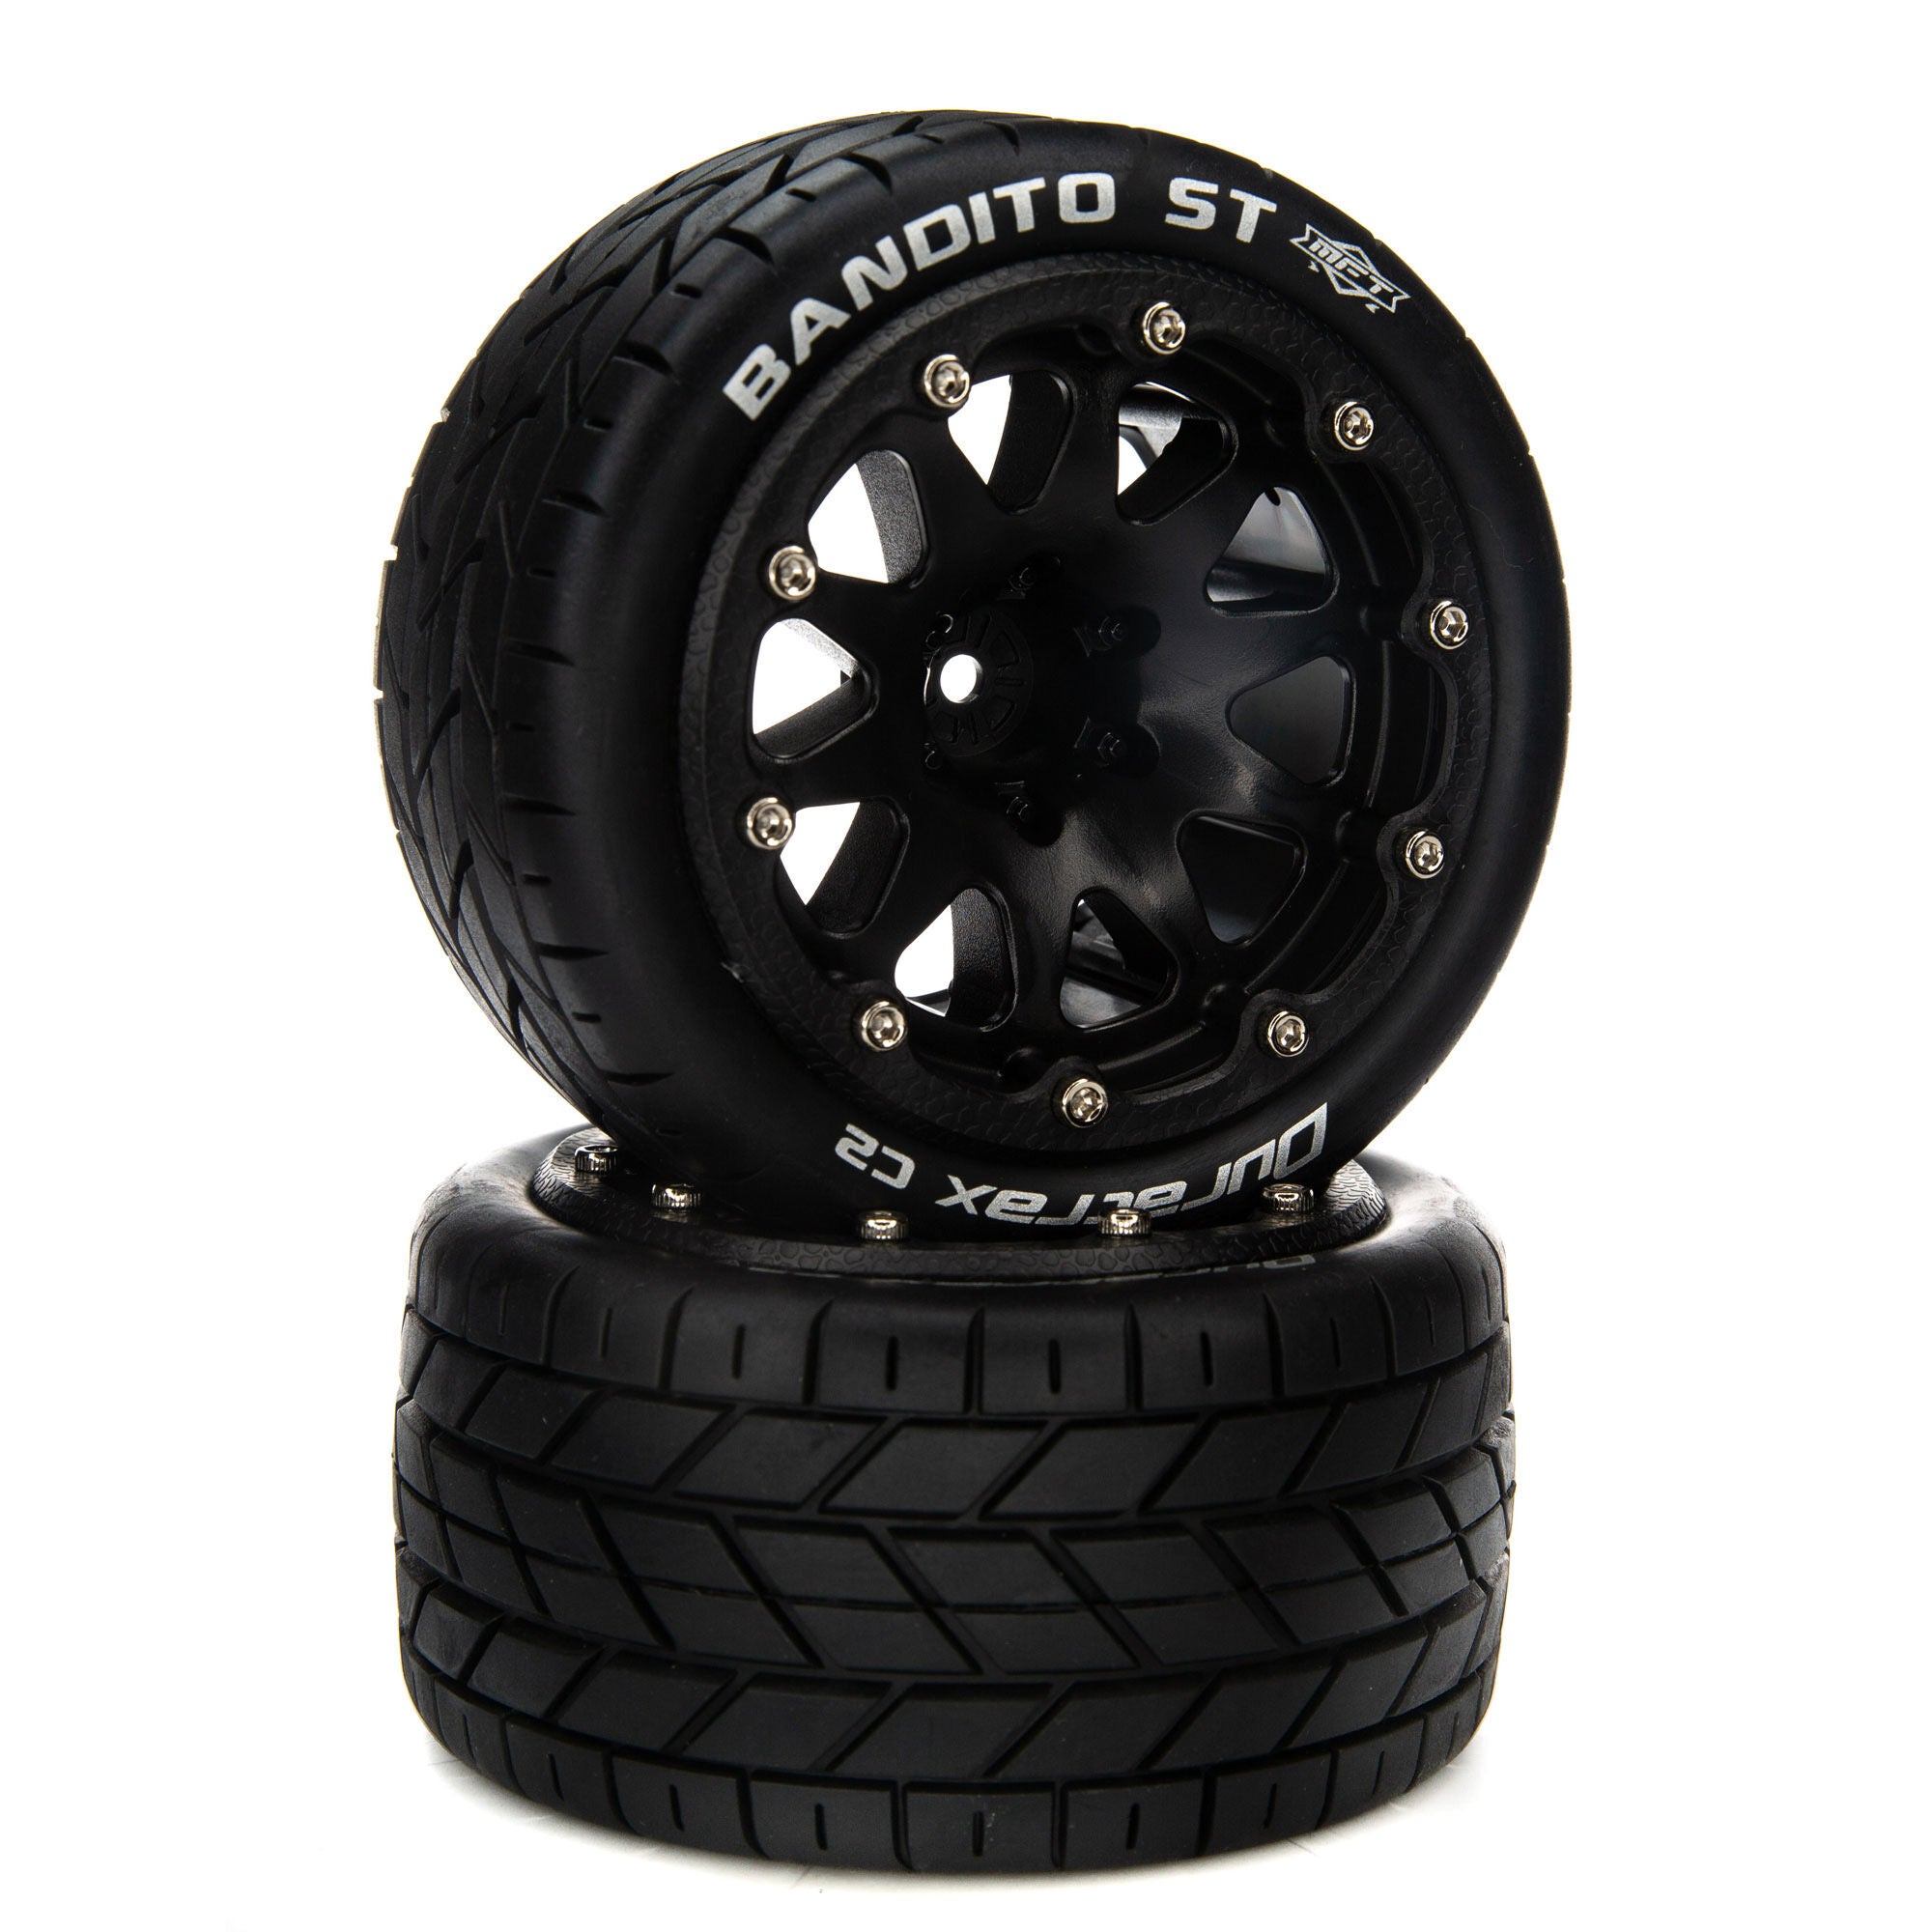 Duratrax DTXC5540 Bandito ST Belted 2.8" Mounted Front/Rear Tires, 14mm Black (2)